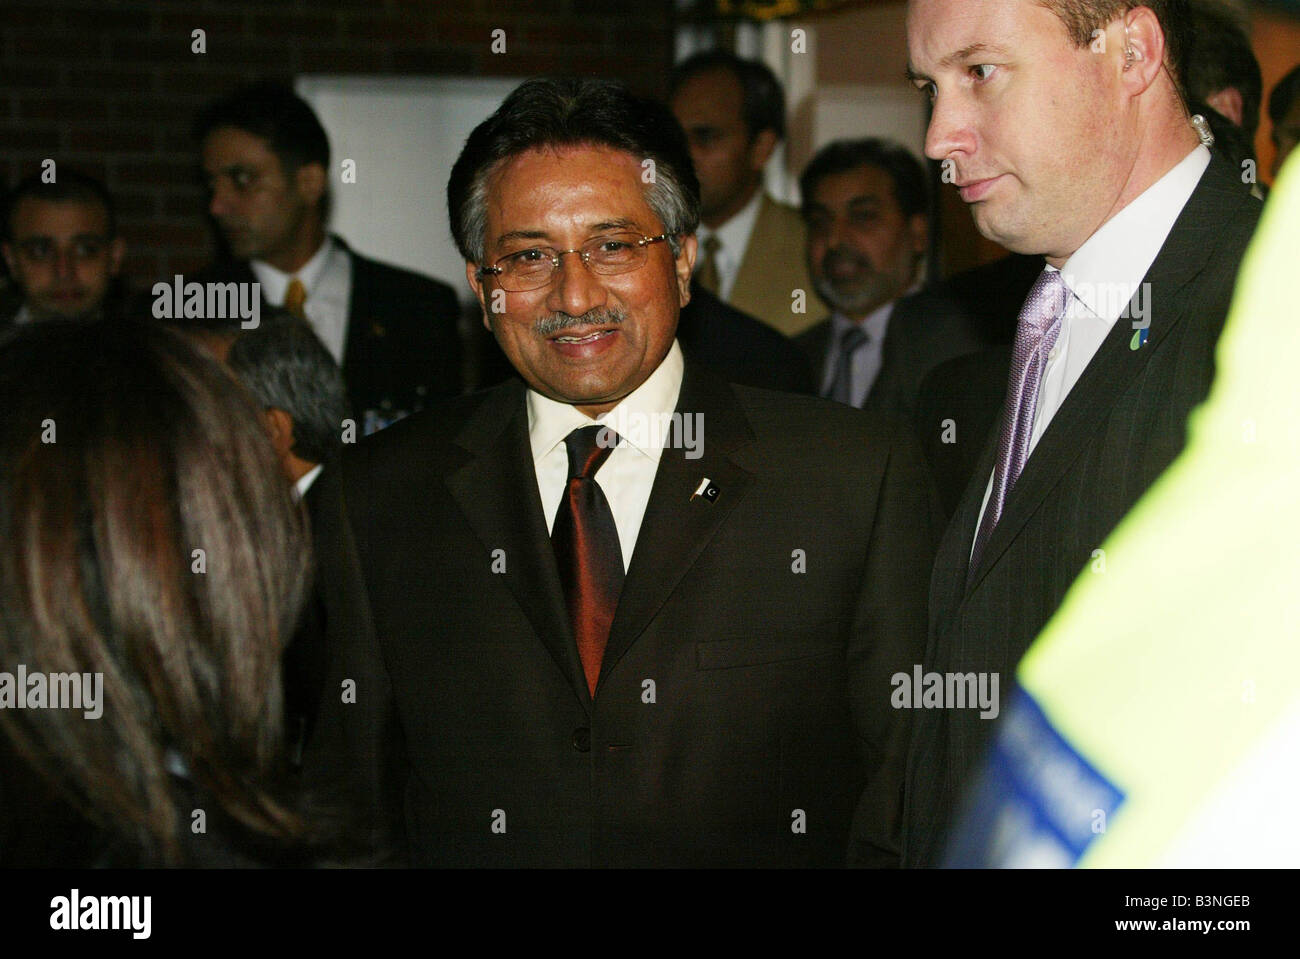 Pakistan President Musharraf leaves Manchester surrounded by tight security December 2004 Stock Photo